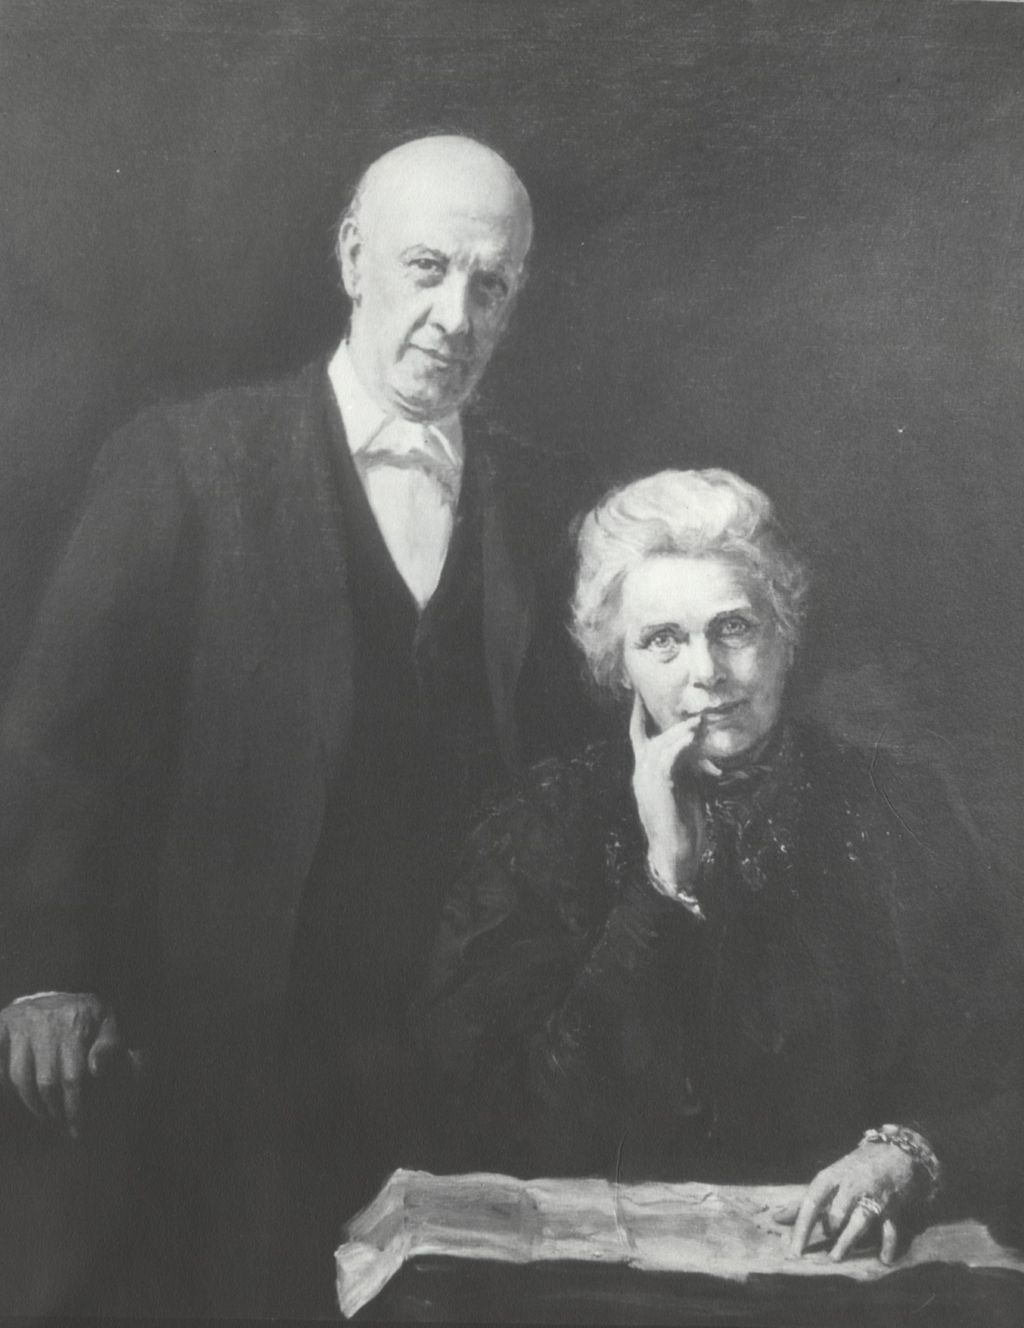 Miniature of Painted portrait of Samuel and Henrietta Barnett, co-founders of Toynbee Hall in London